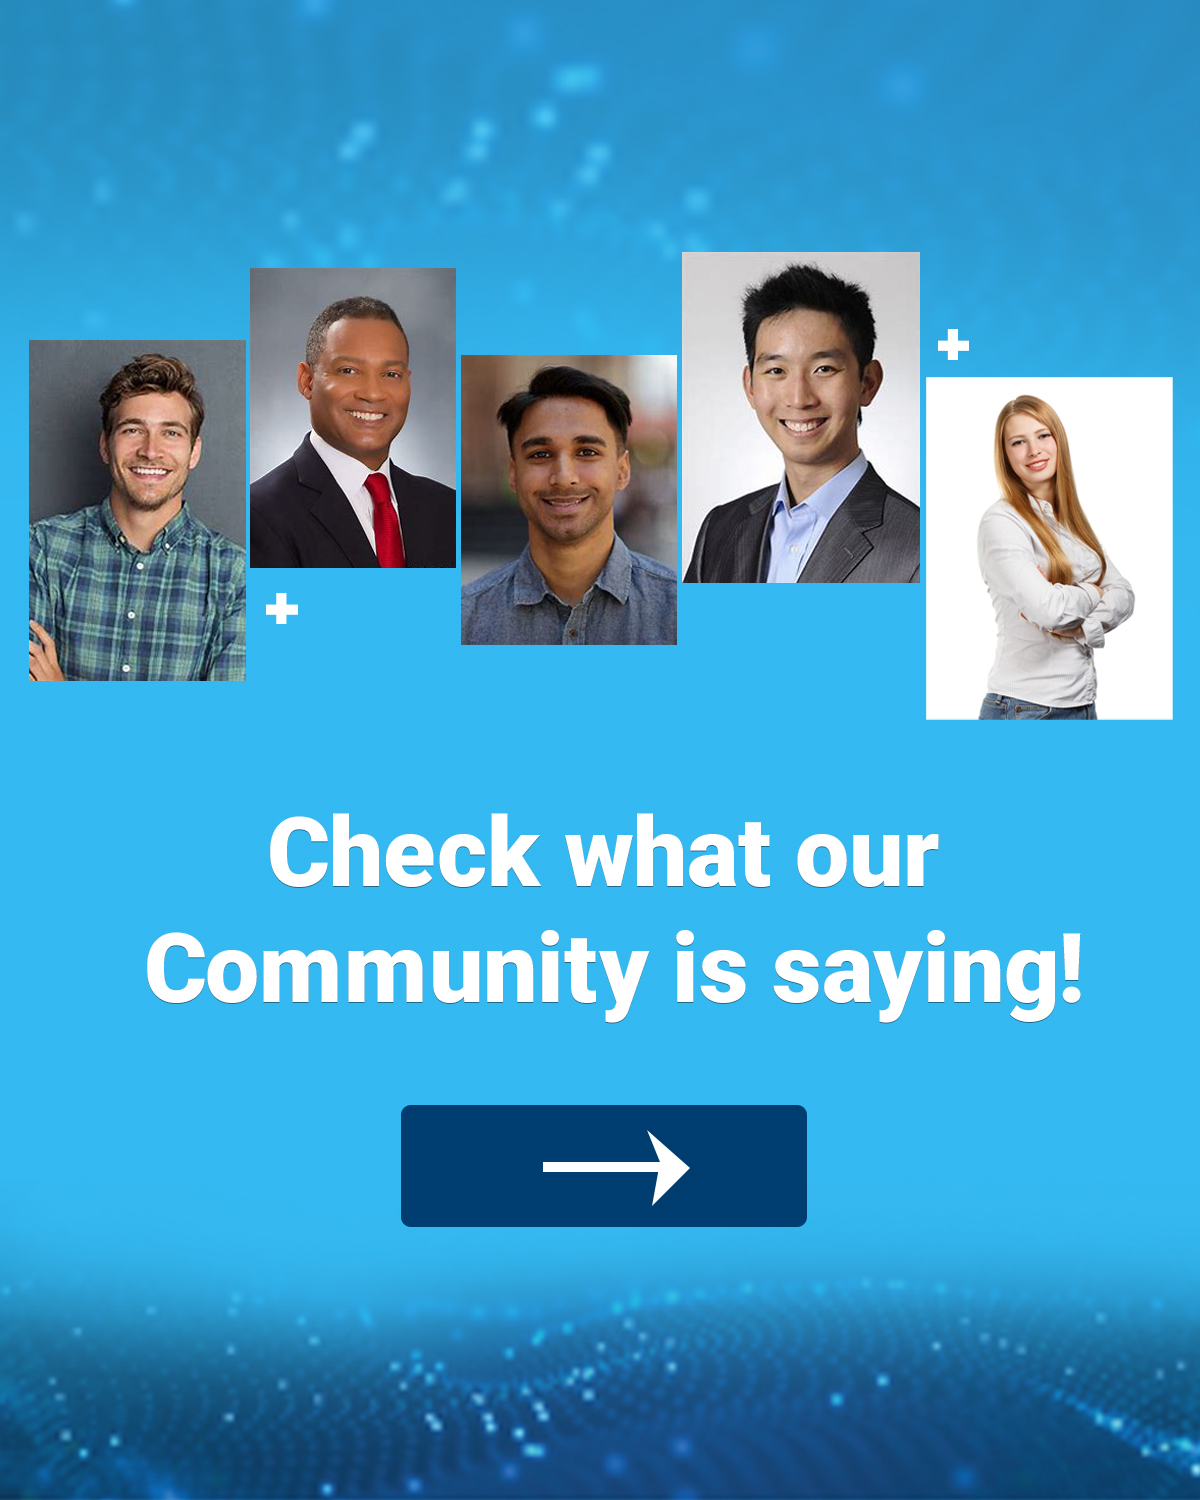 Check what our community is saying